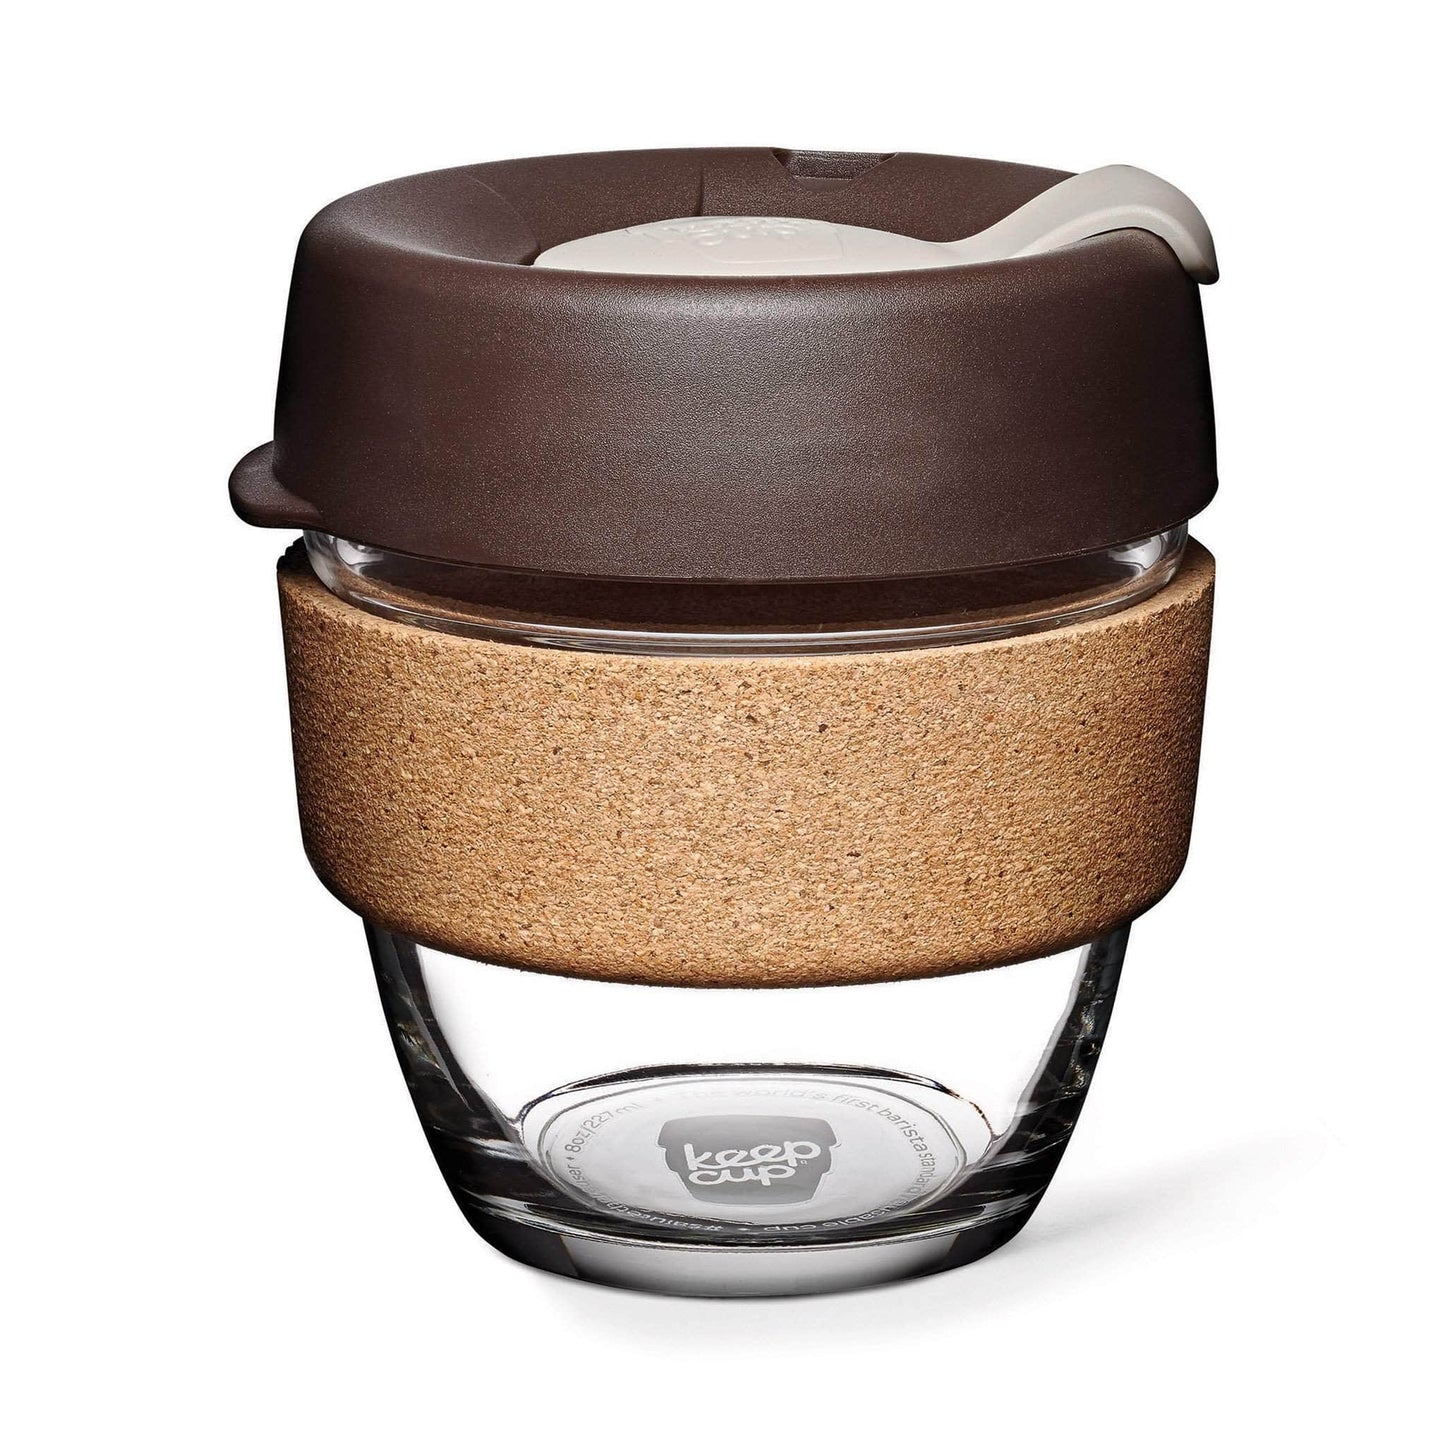 Keepcup Brew Cork Coffee Cups Keepcup Brew 8oz Glass Coffee Cup With Cork Band - Almond